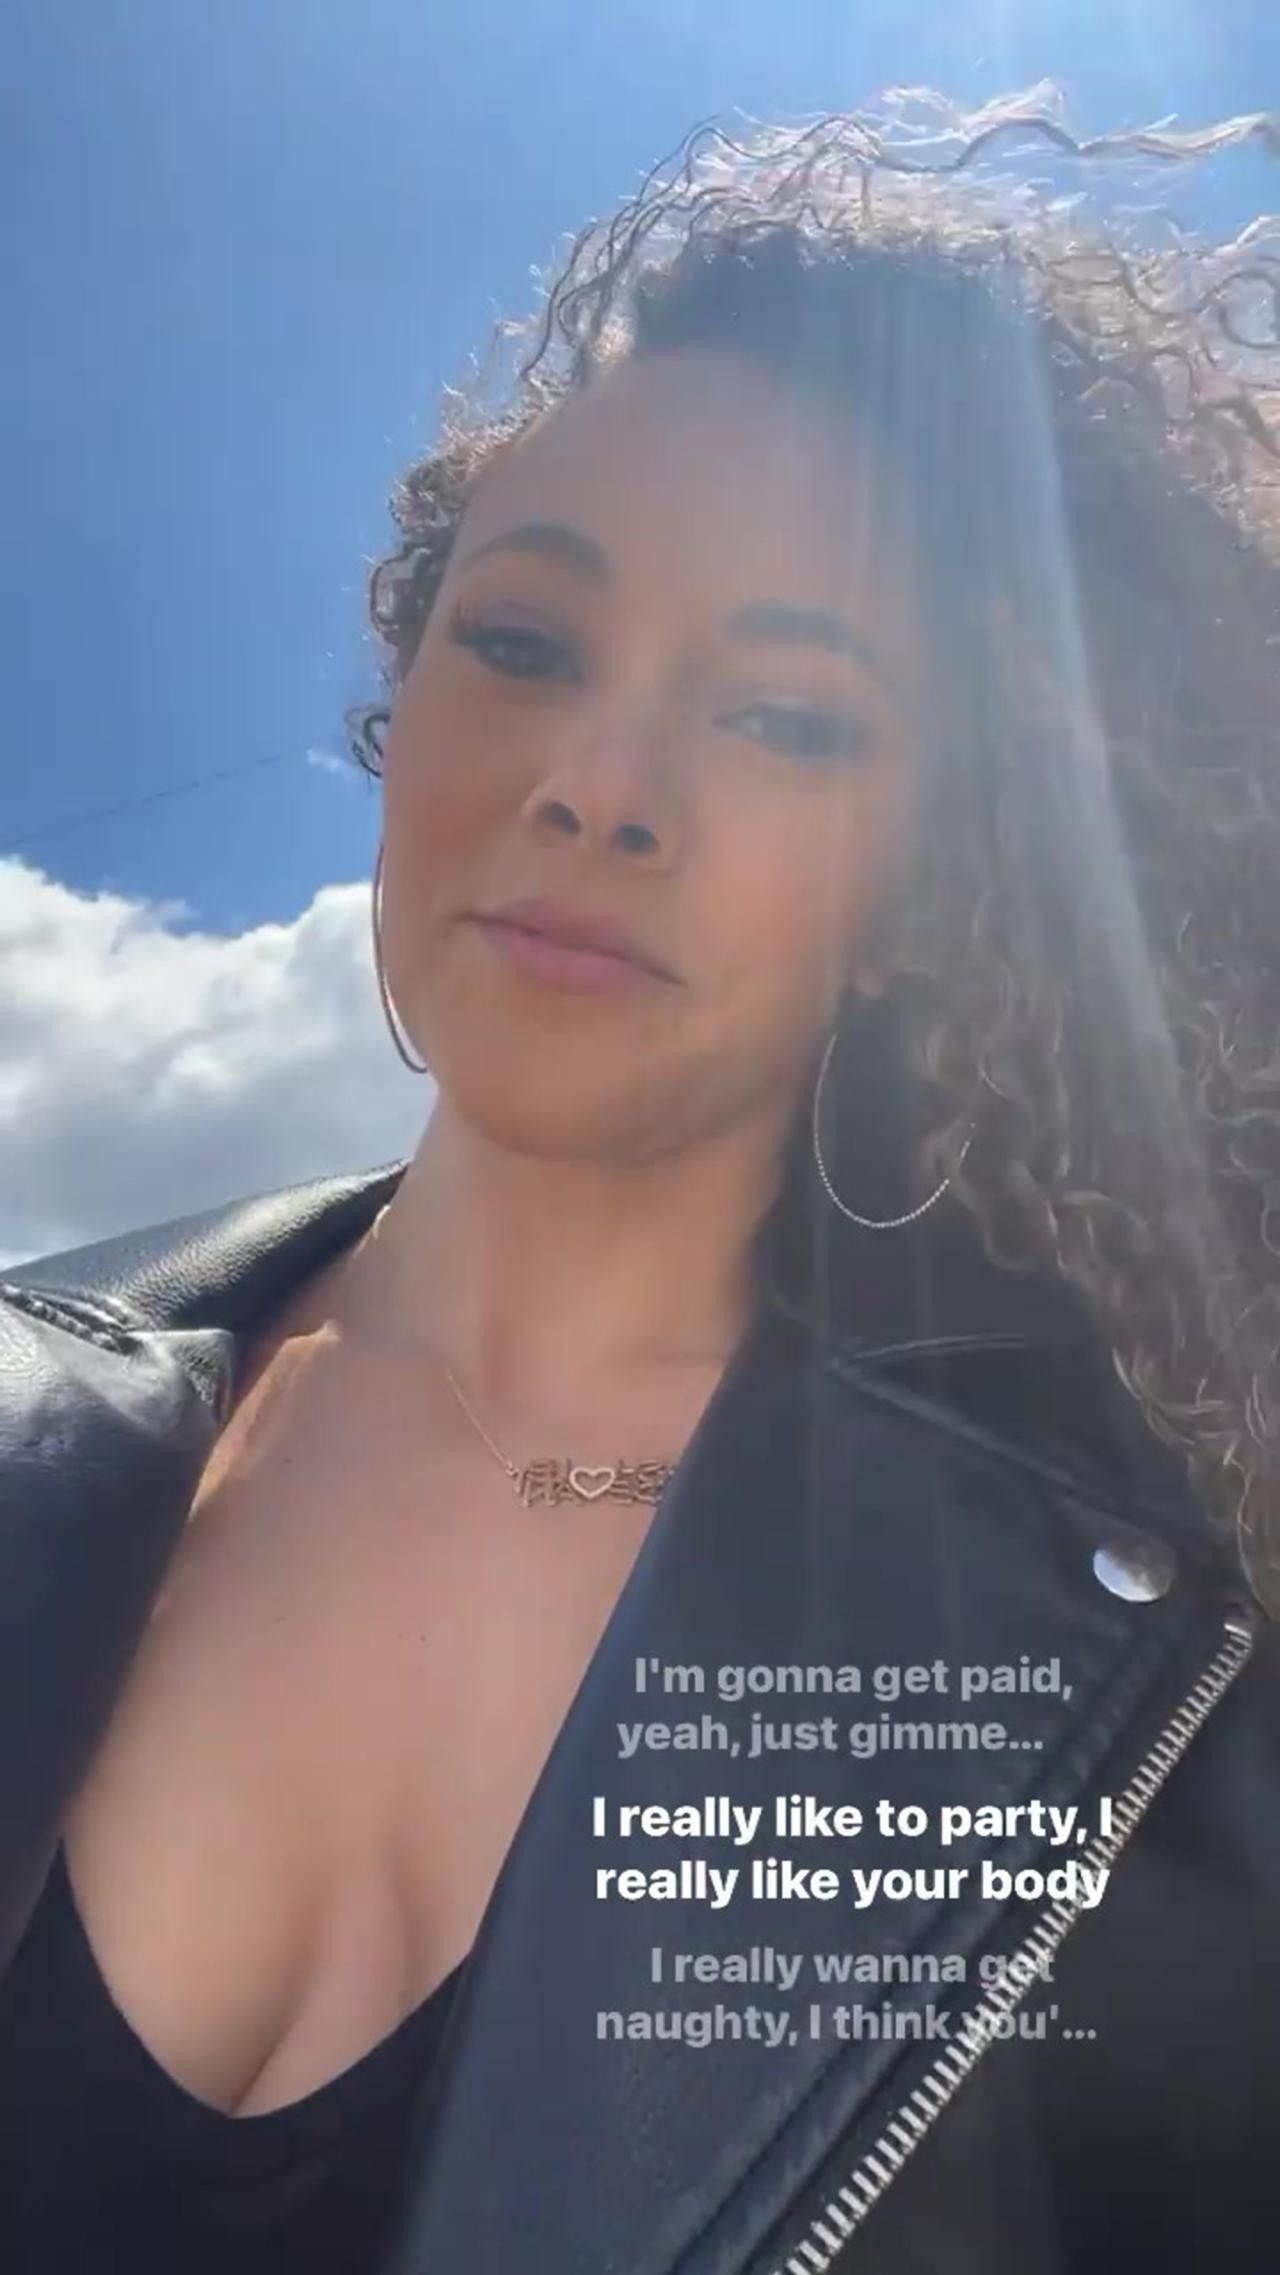 Ashley Darby posts video about getting paid